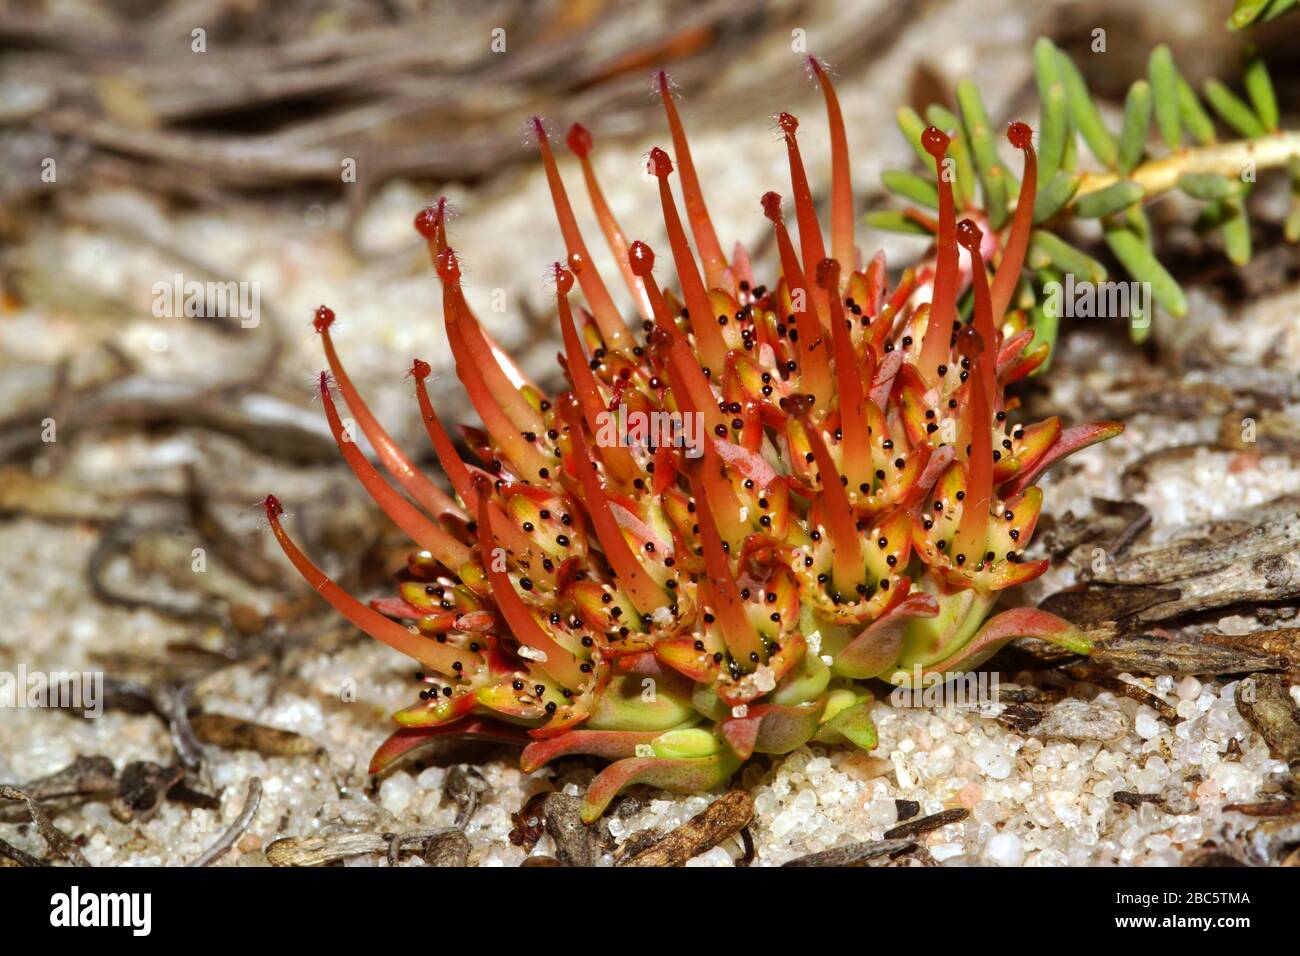 Darwinia virescens, the Murchison Darwinia, with red flower on white sand in the Geraldton area in Western Australia Stock Photo